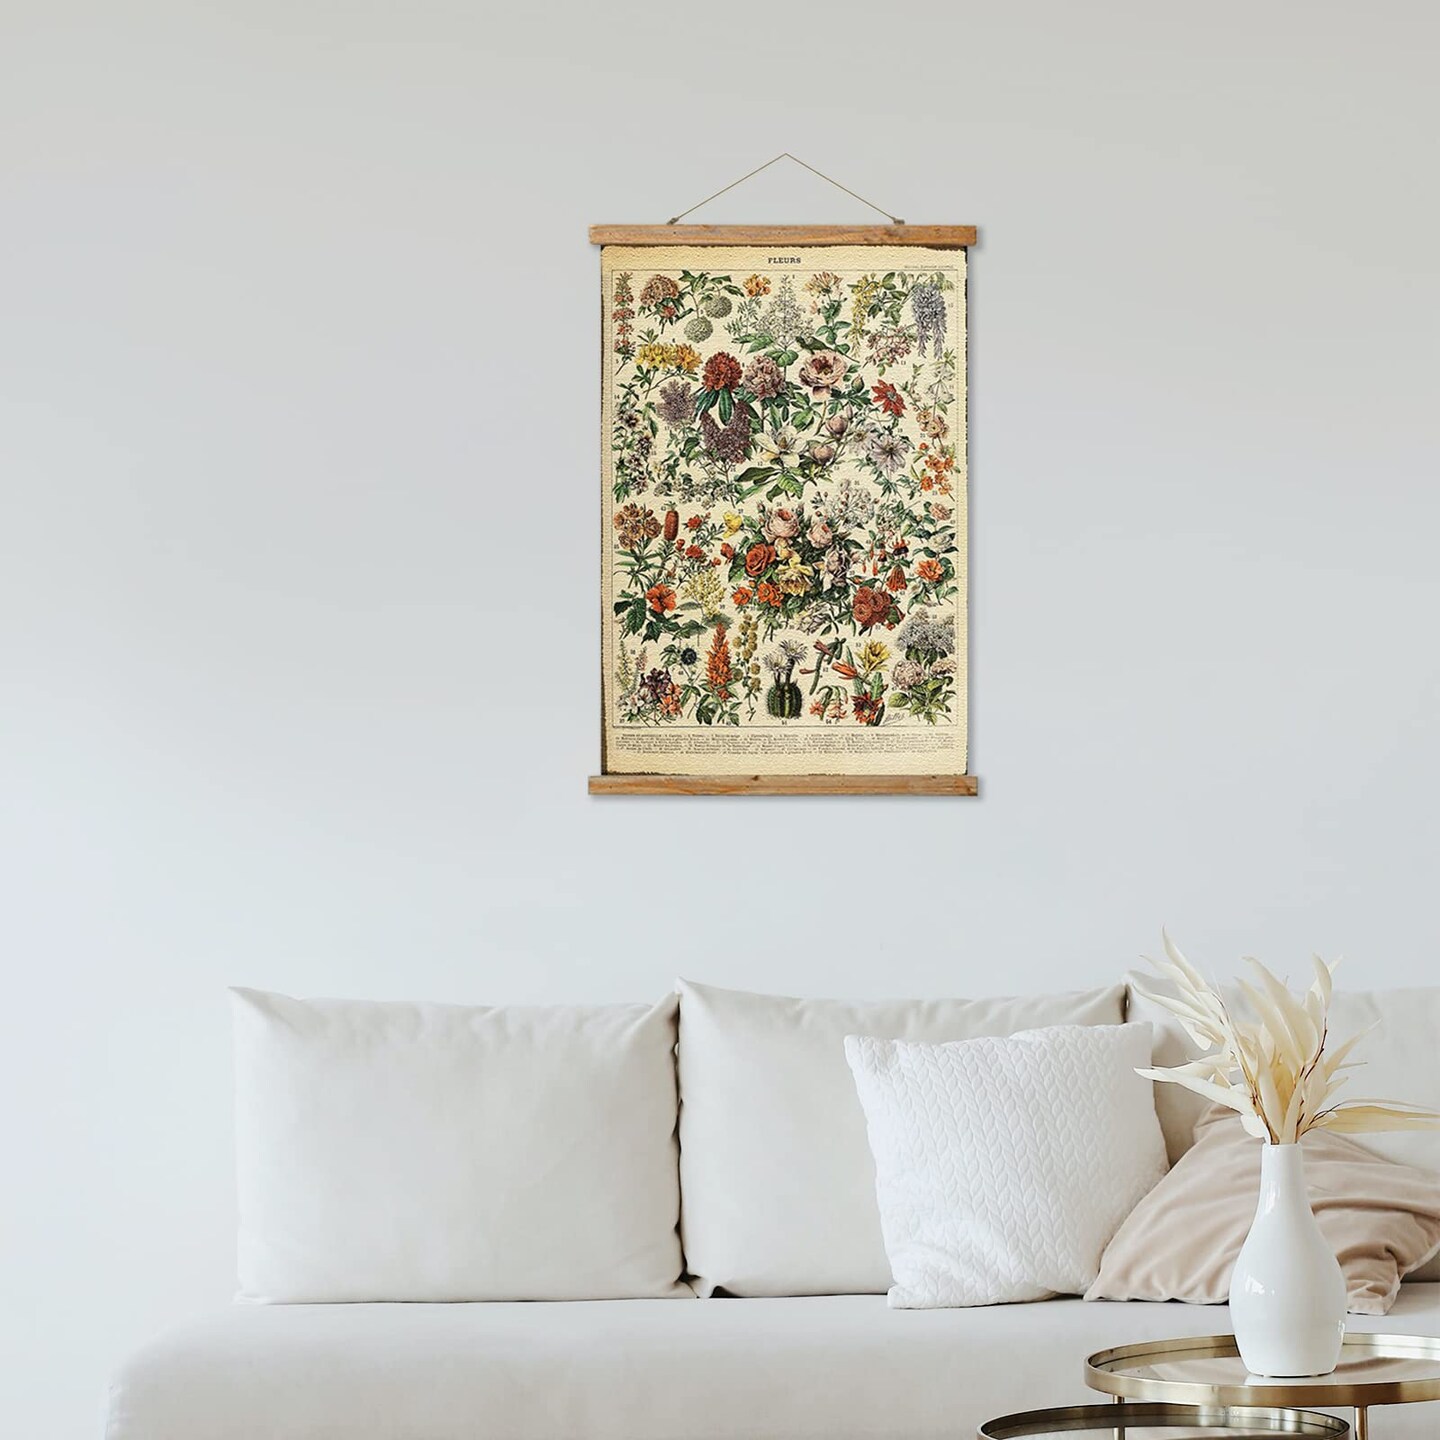 Vintage Flower Poster Hanger Frame, Retro Style Wall Art Prints, Printed on Linen with Natural Wooden Frames, Wall Hanging Decor